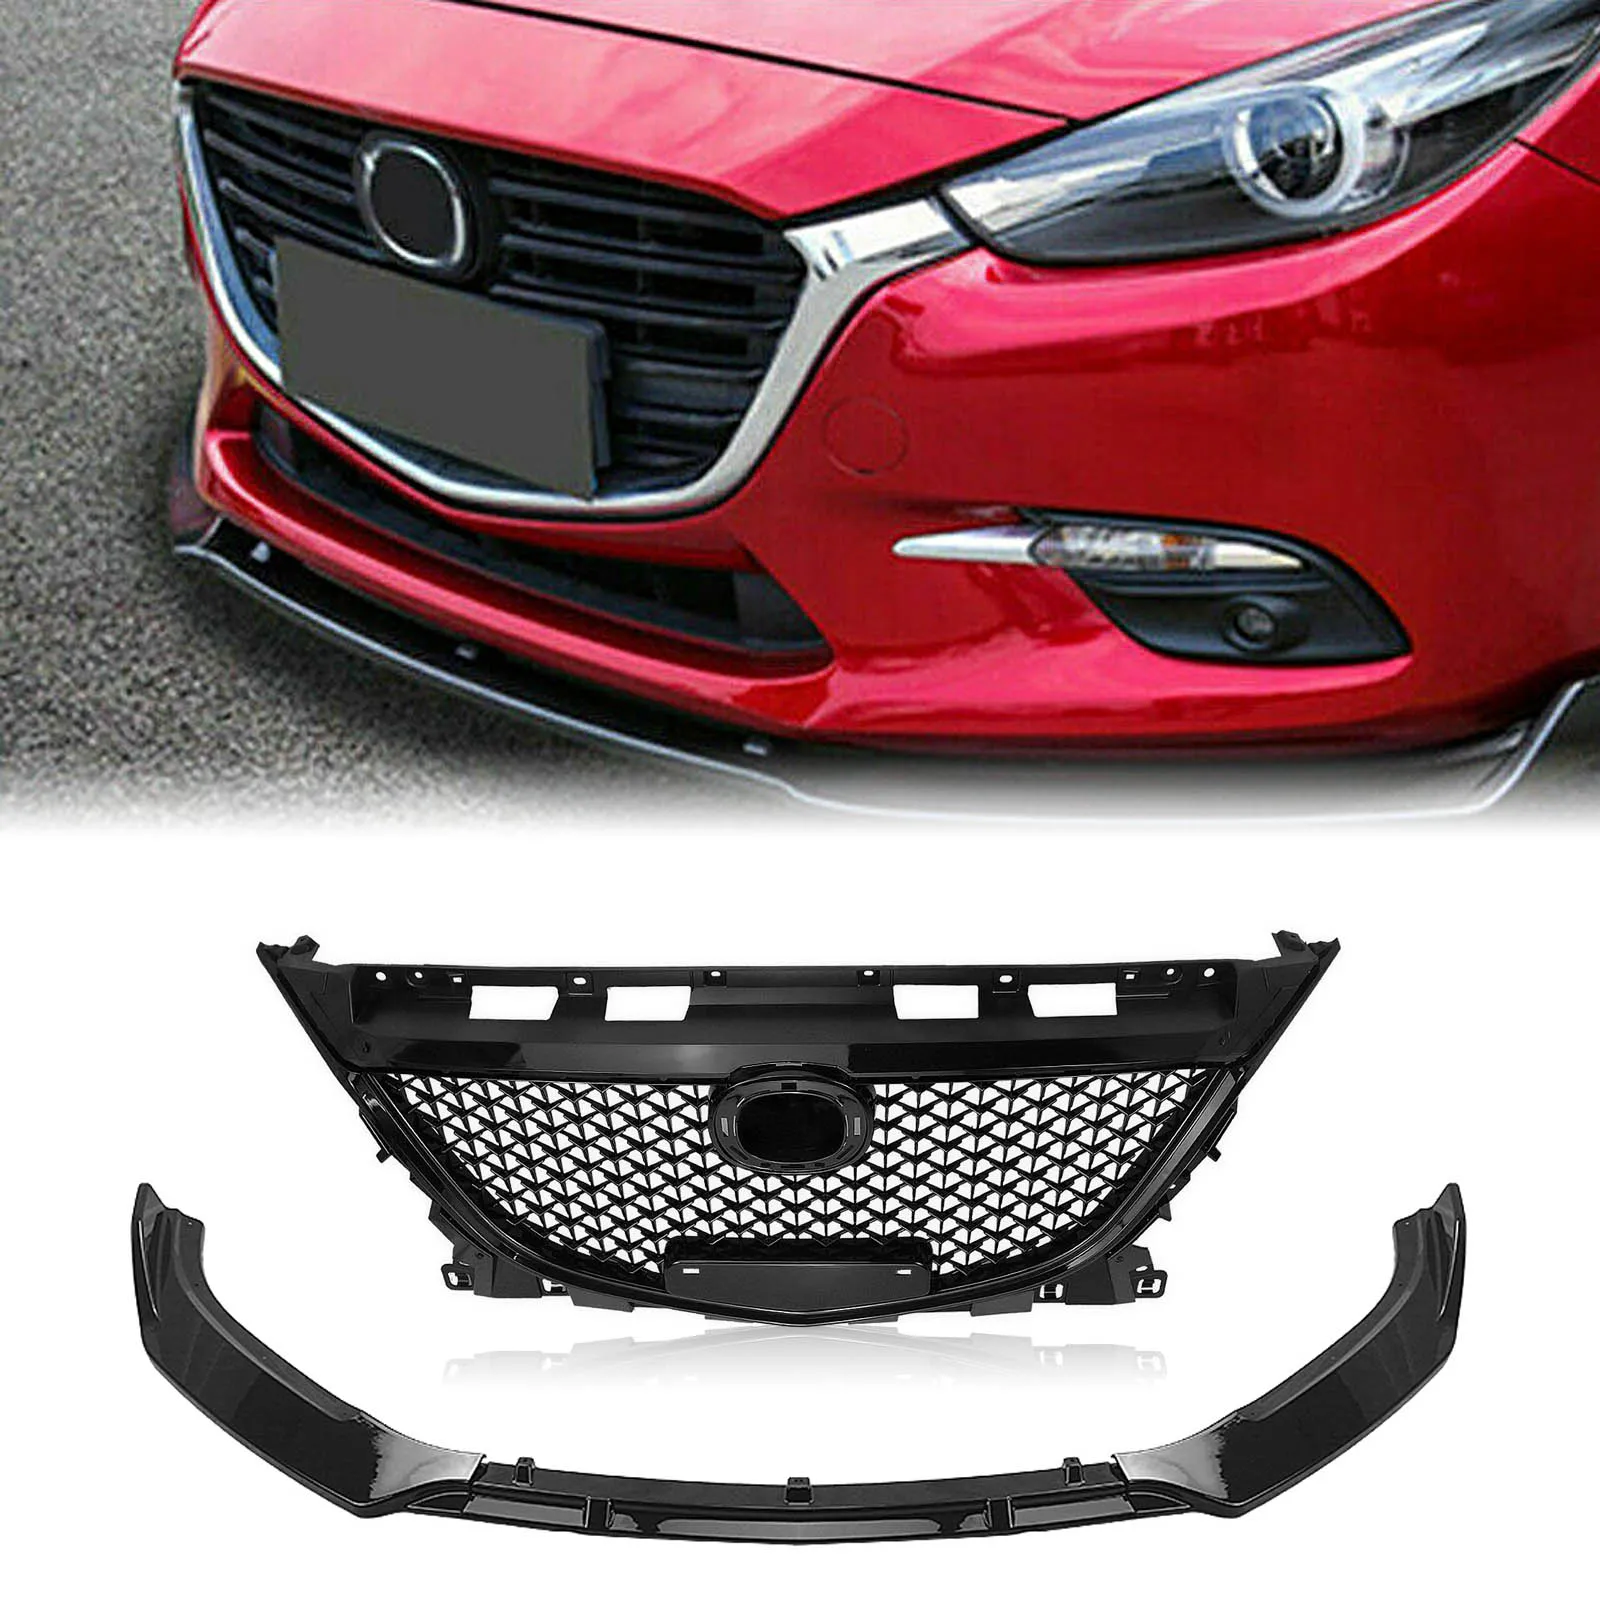 

For Mazda 3 Axela 2014-2016 Front Grille Honeycomb Style Racing Grills+Car Lower Bumper Spoiler Splitter Guard Plate Blade Lip